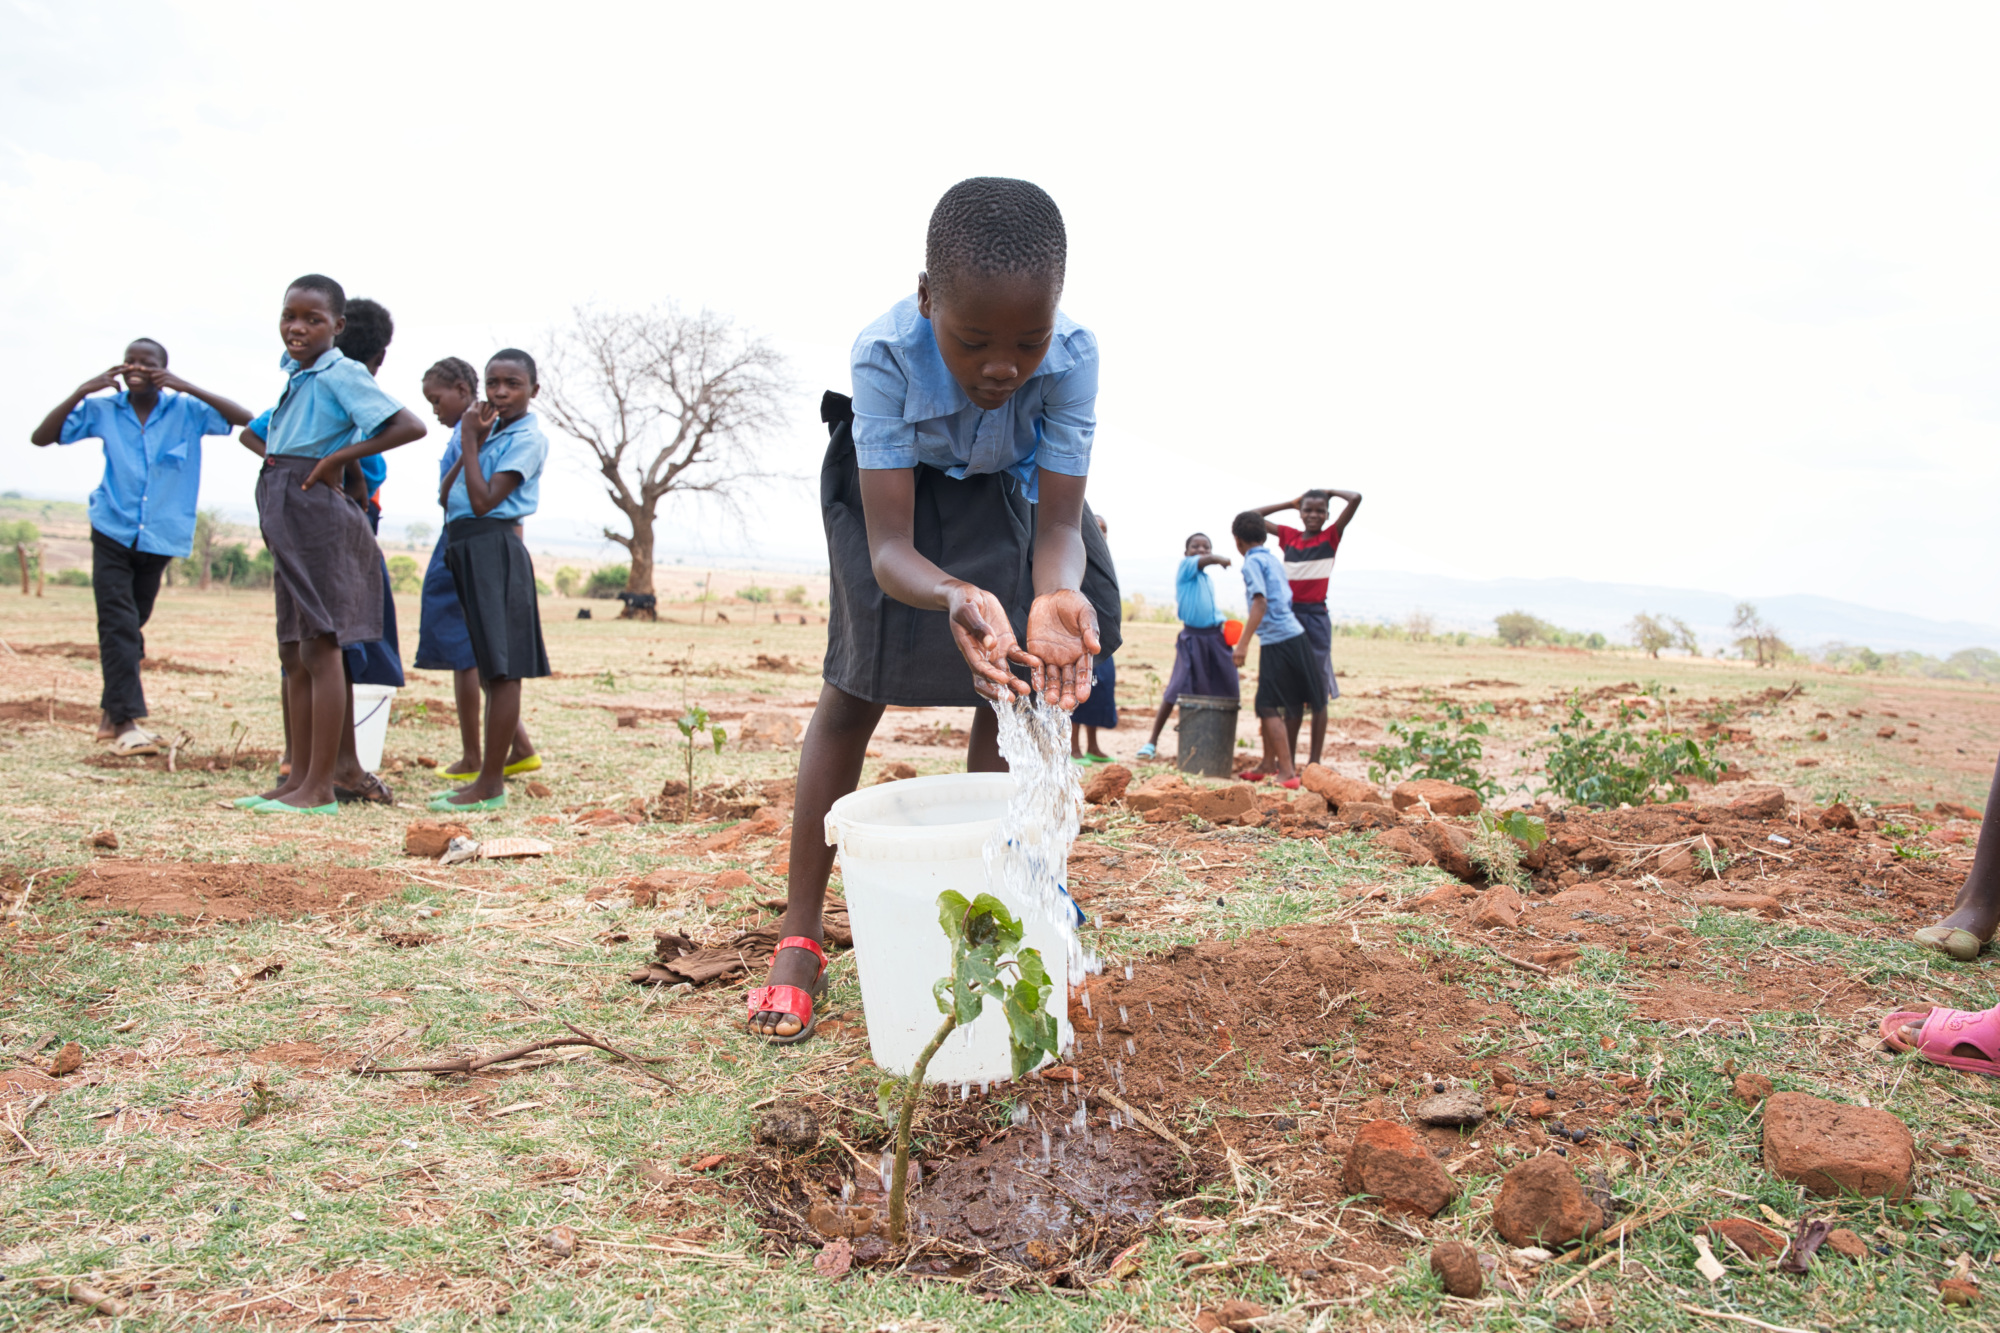 A student plants a tree as part of the Earth Warriors project implemented at Nkunga Community School in Zambia, run by local partner Impact Network (Theirworld/Jason J Mulikita)